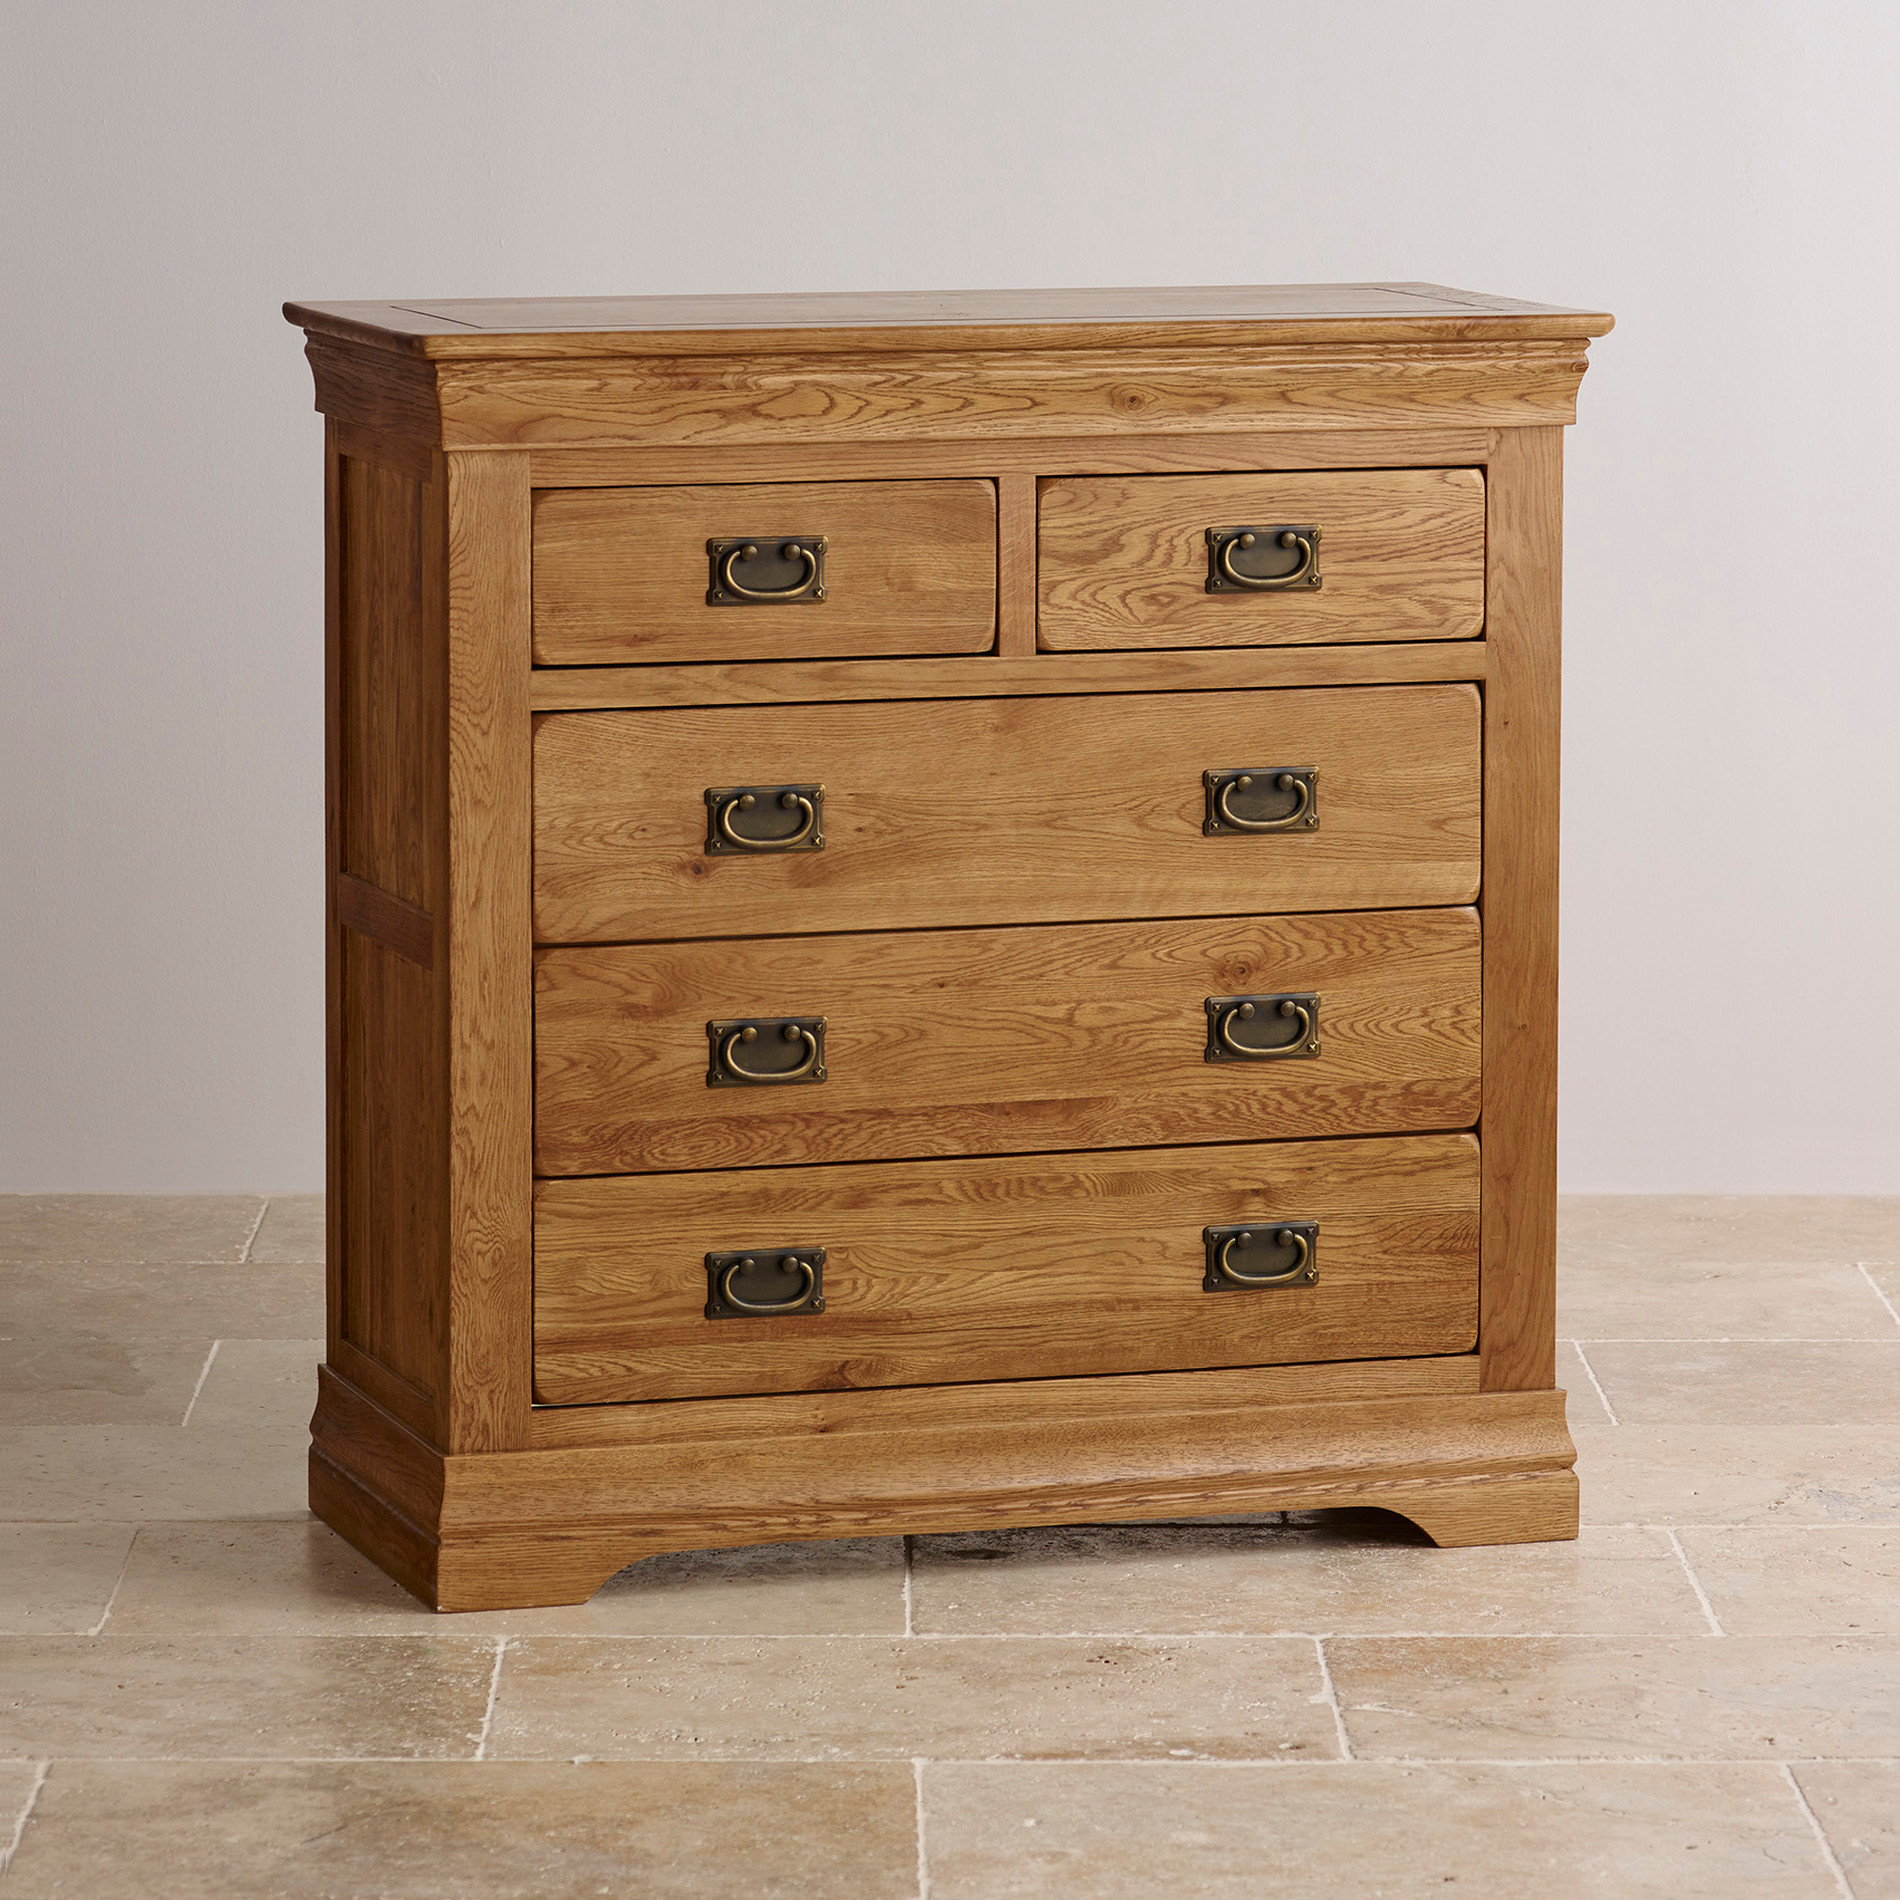 Chest of drawers – a symbol of
  aristocracy